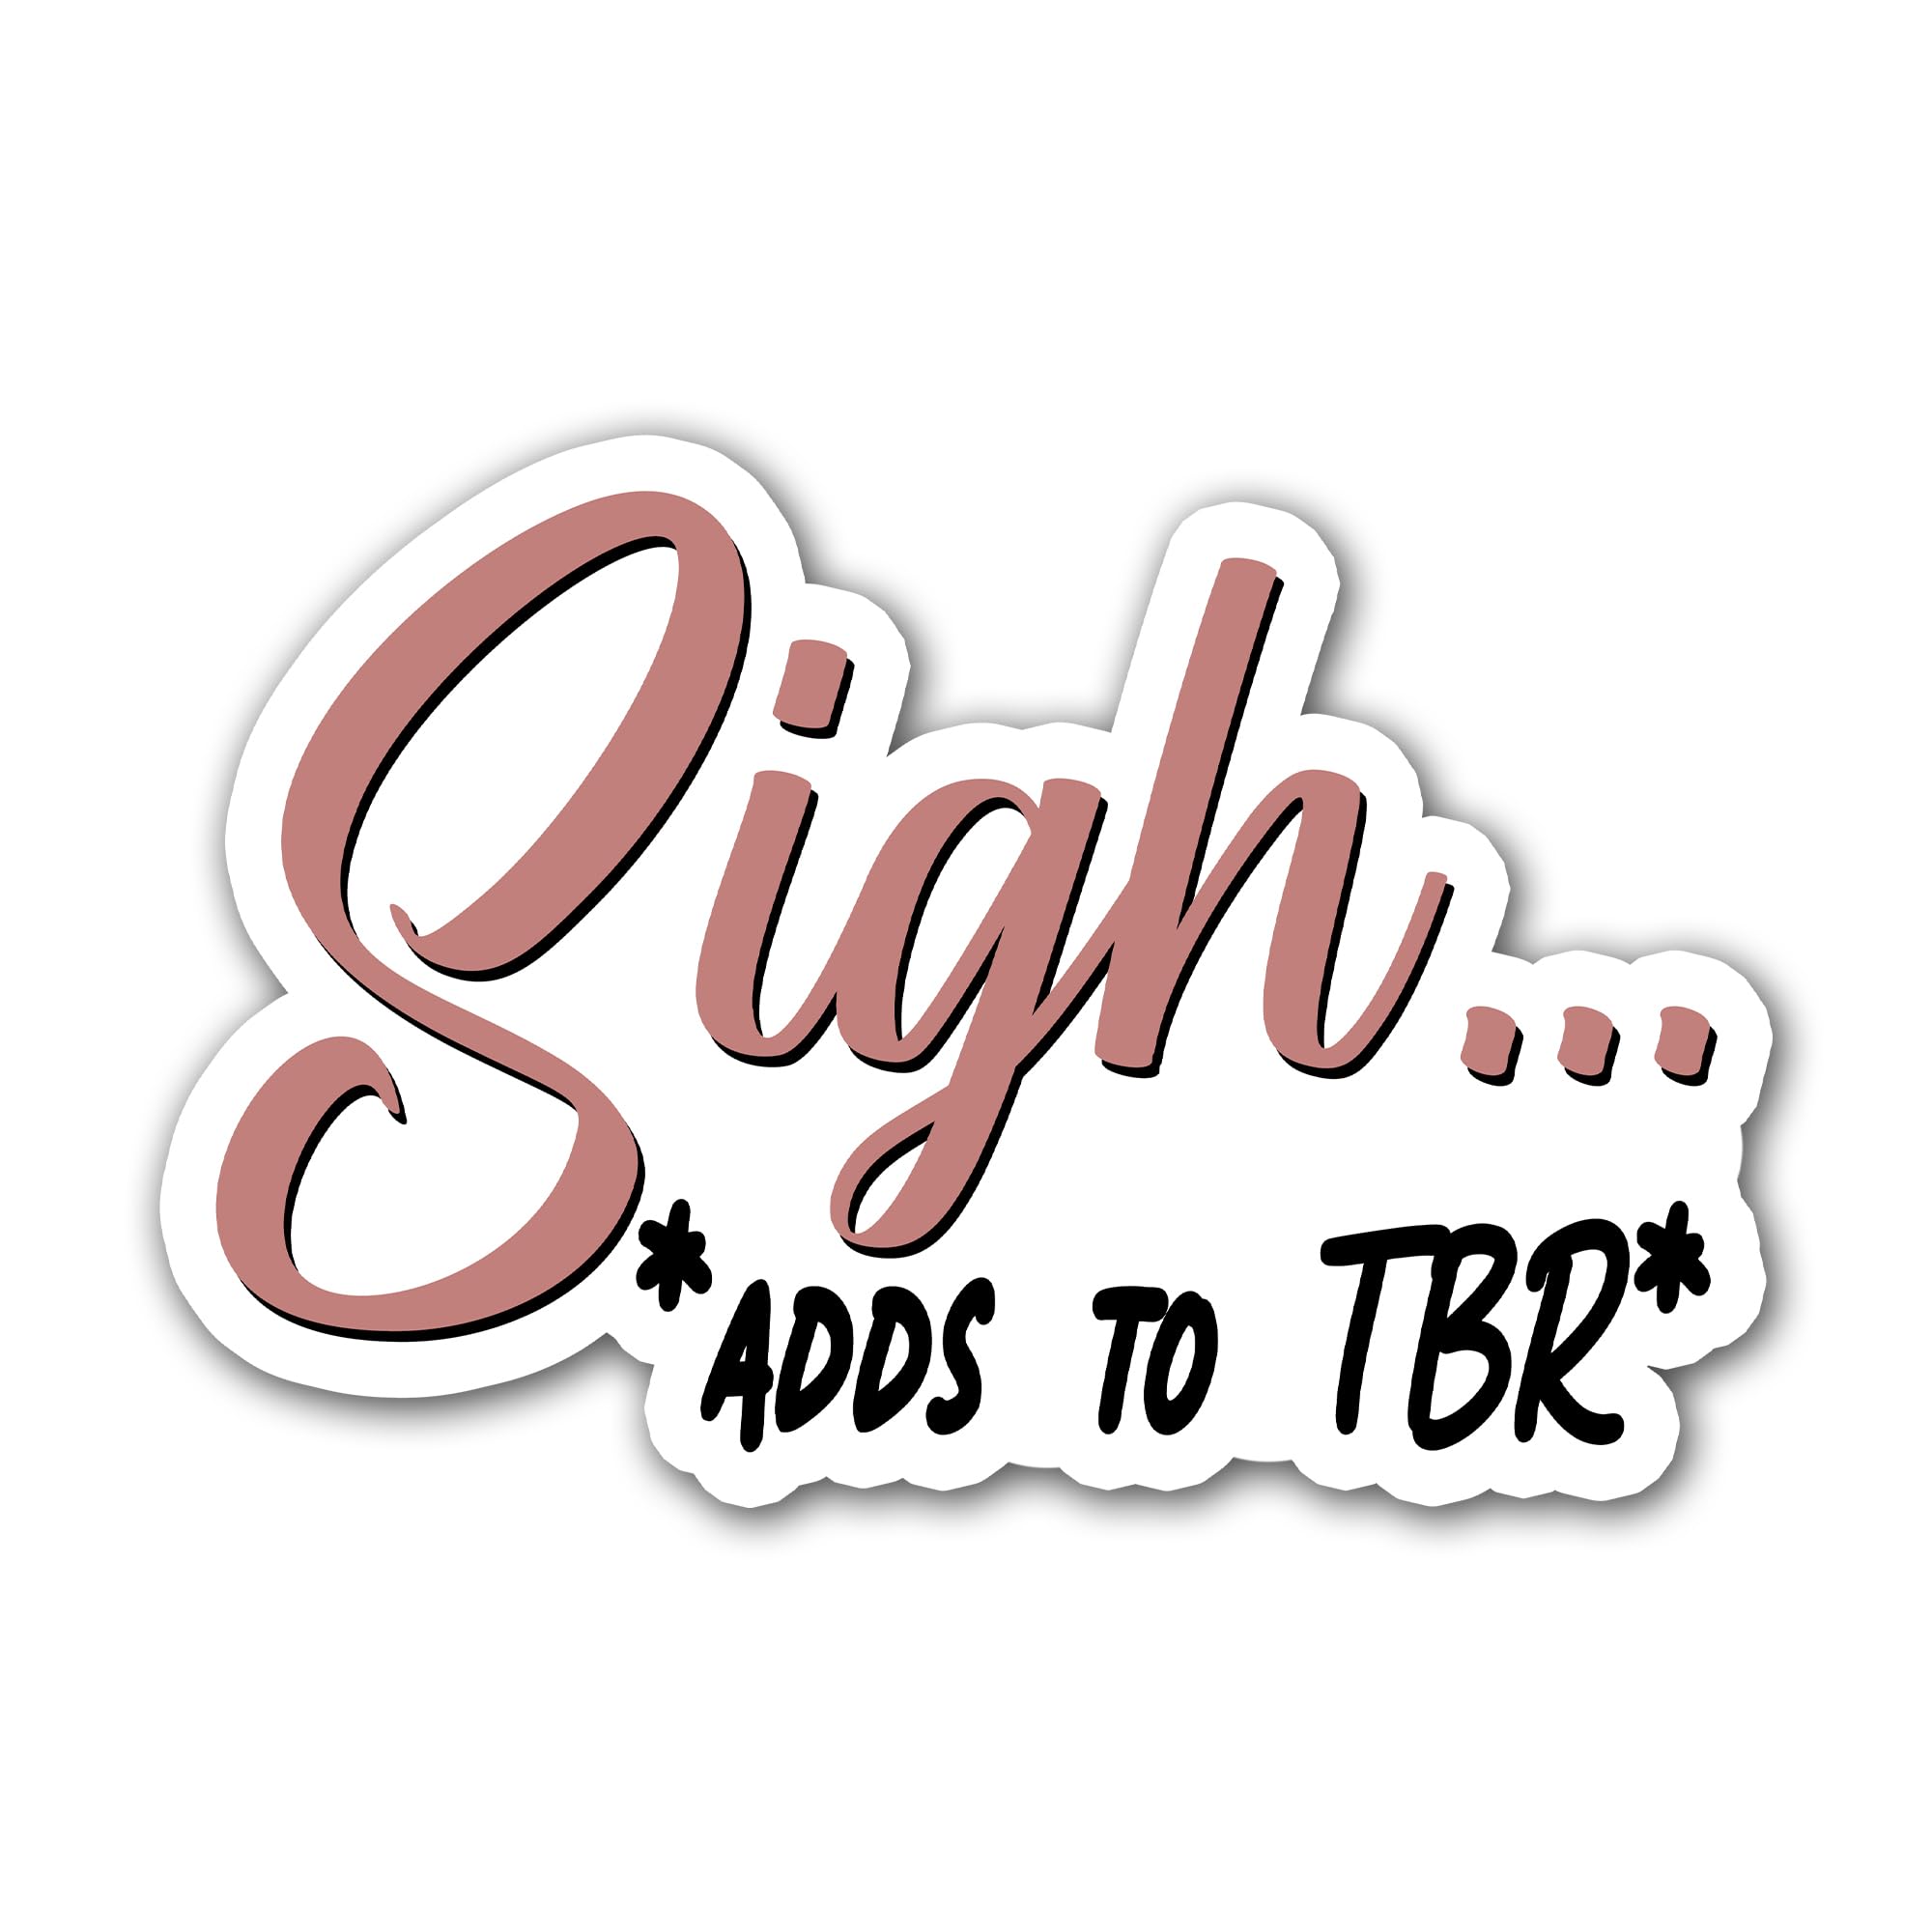 Sigh Adds To TBR Sticker, Book Lover Stickers, Romance Reader Stickers, Bookish Stickers, Water Assistant Die-Cut Vinyl Decals for Laptop, Phone, Guitar, Water Bottles, Kindle Stickers